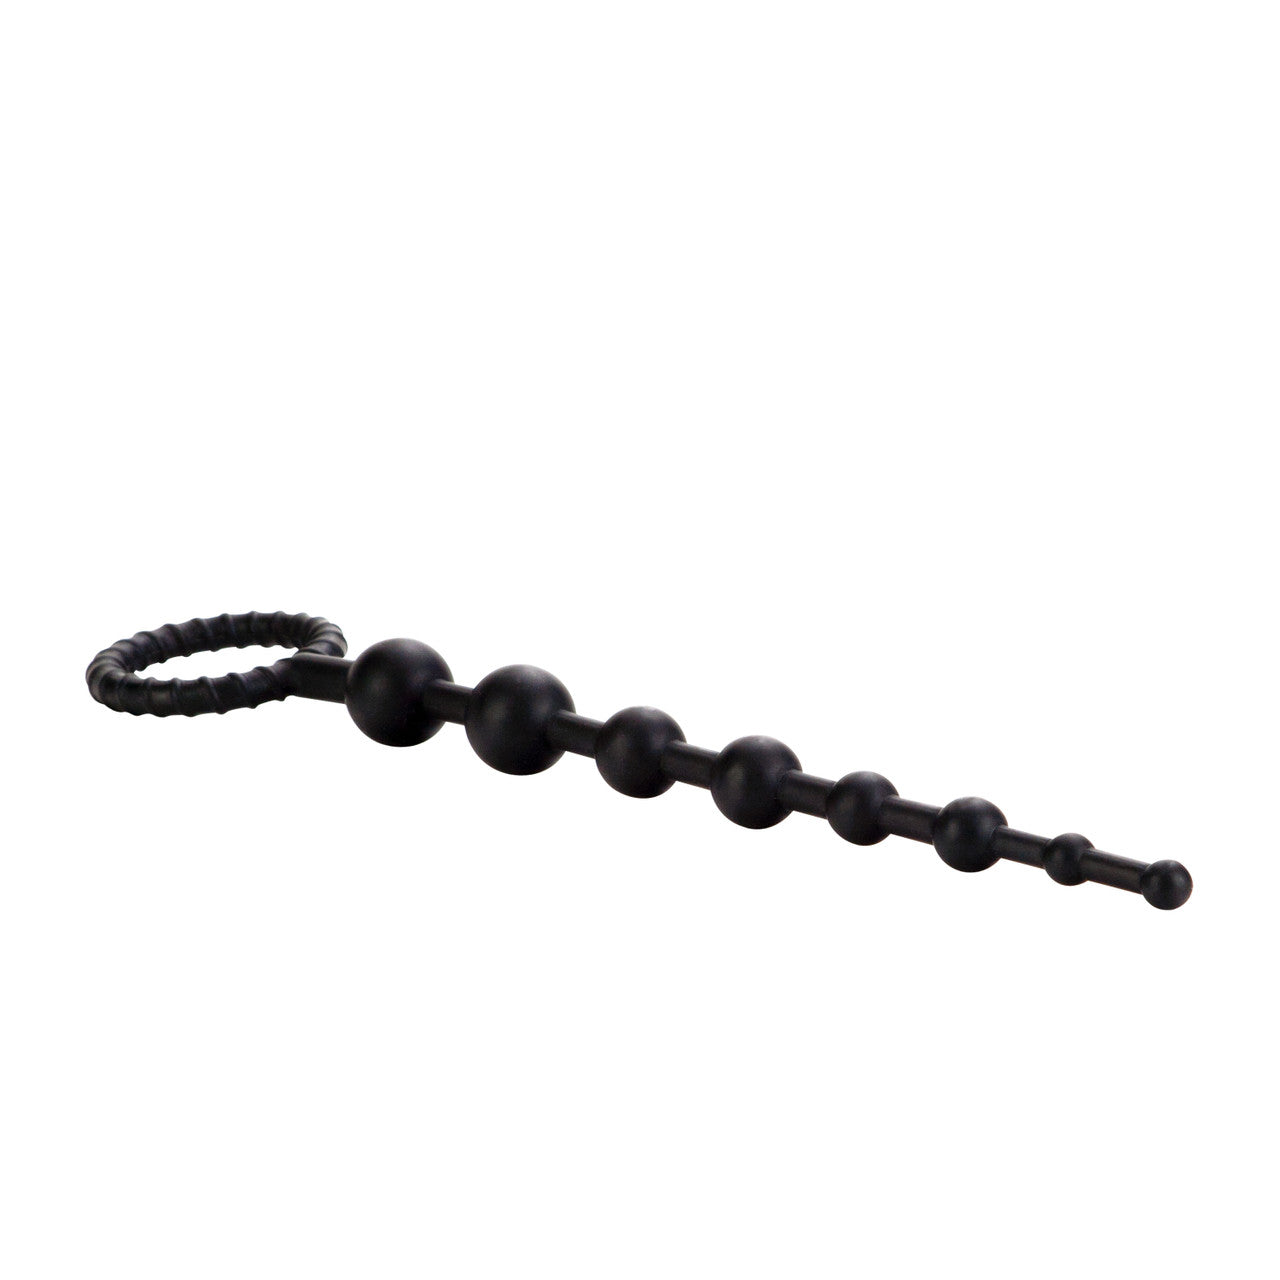 Booty Call X-10 Beads - Black - Thorn & Feather Sex Toy Canada